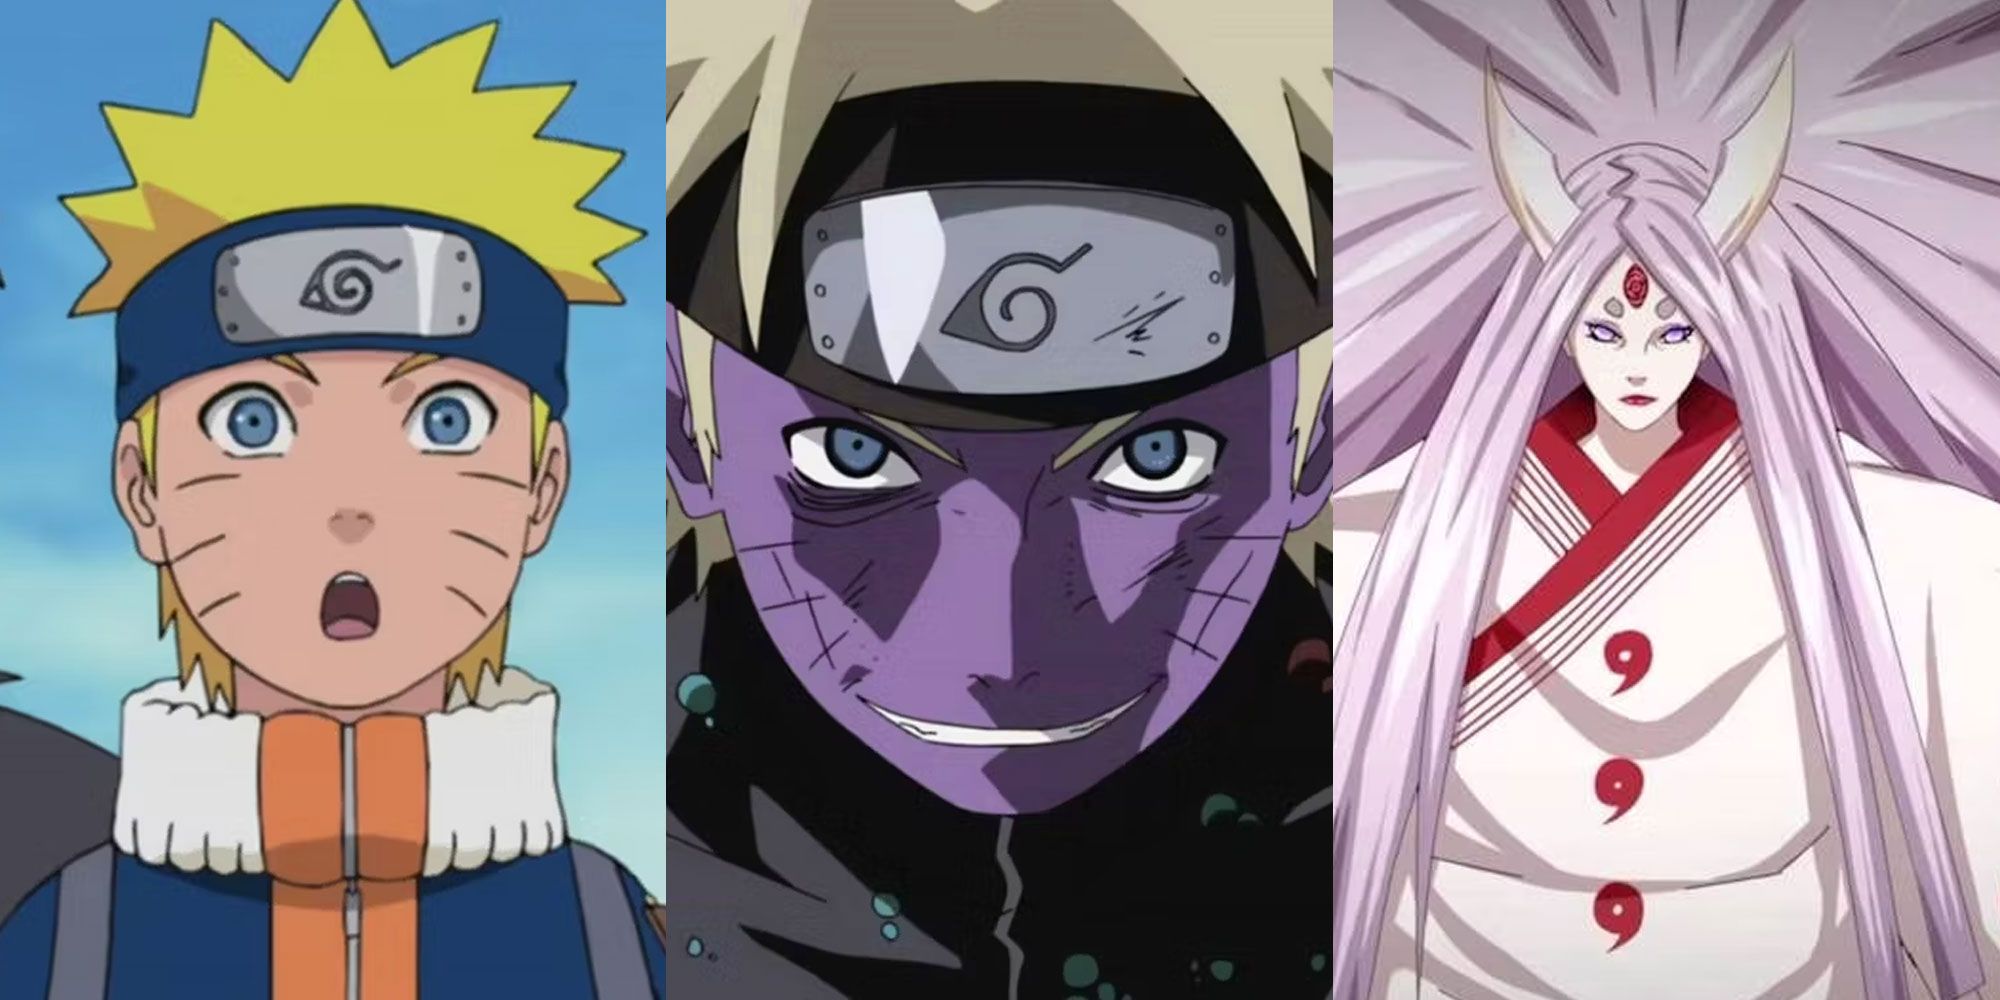 A split image features a surprised Naruto, an ill Naruto, and a powerful Kaguya in the Naruto anime